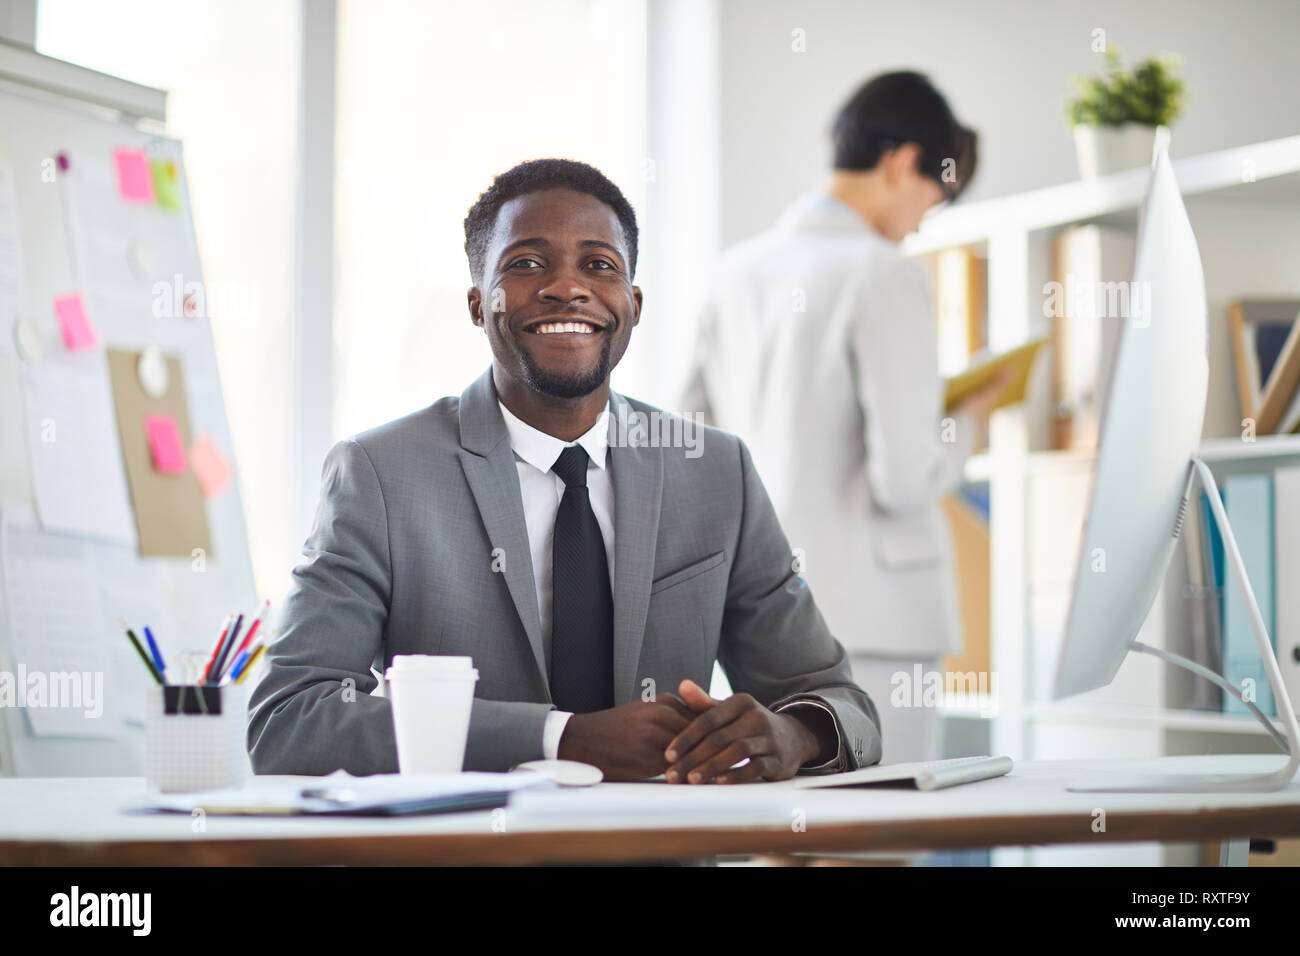 Cheerful businessman Banque D'Images